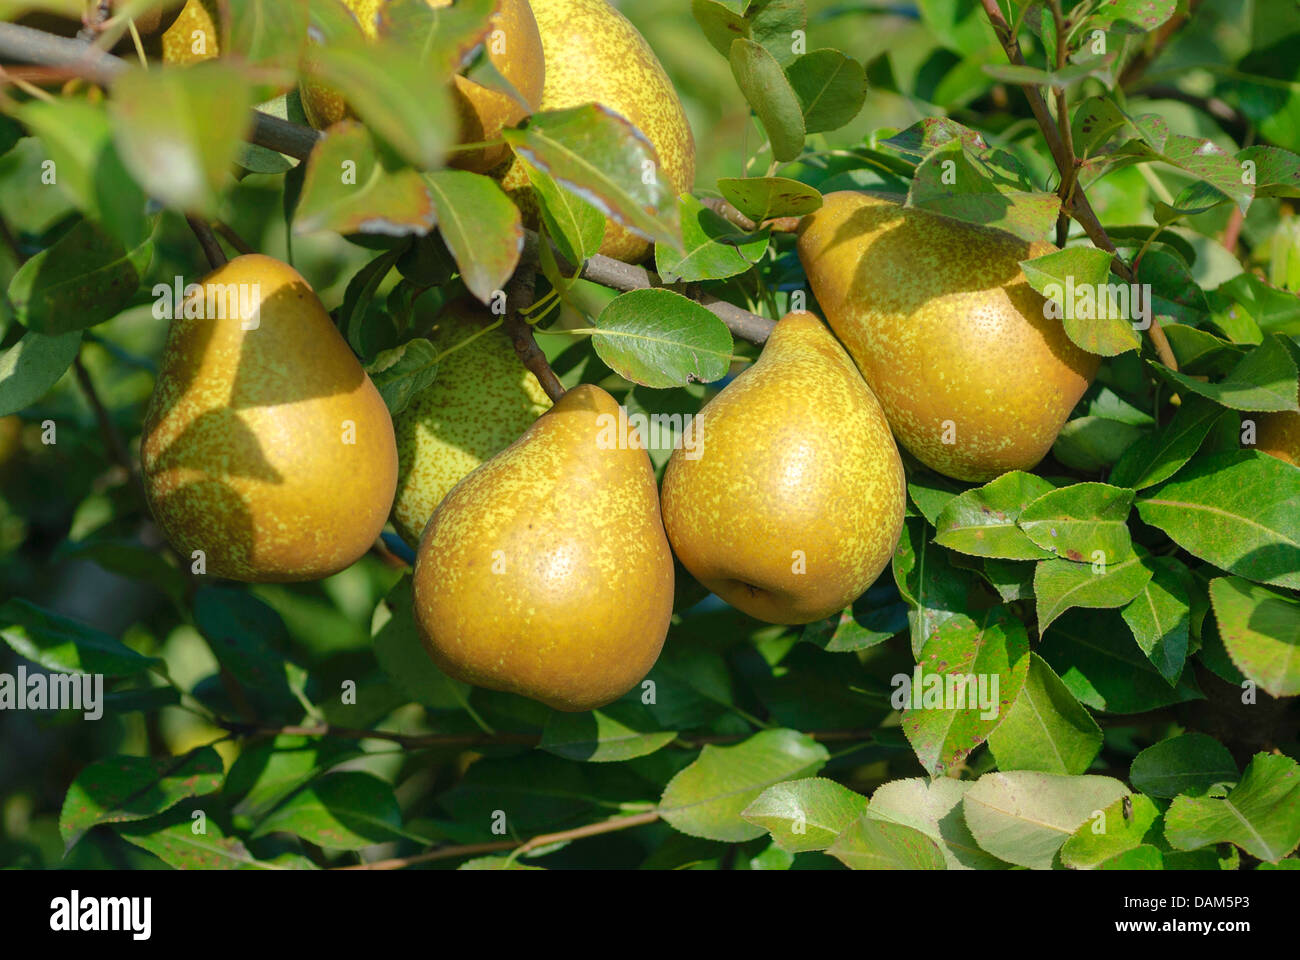 Common pear (Pyrus communis 'General Leclerc', Pyrus communis General Leclerc), cultivar General Leclerc, Germany Stock Photo